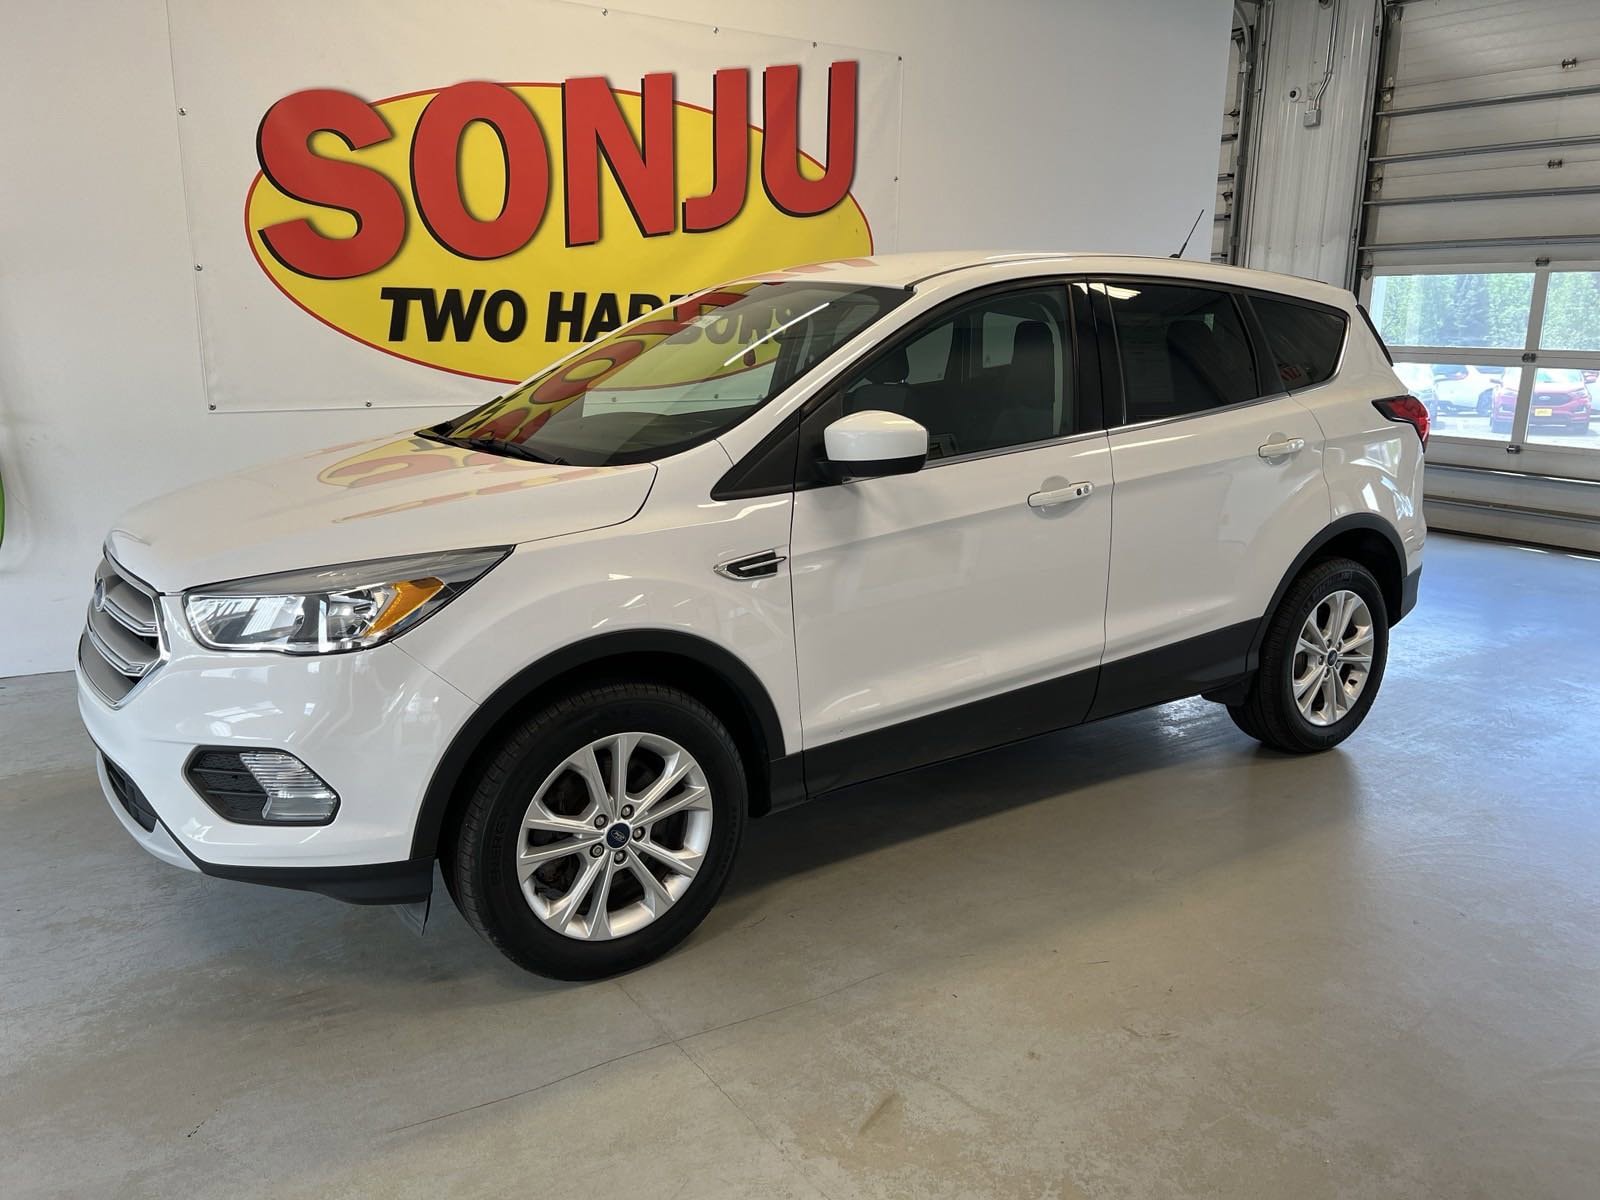 Used 2019 Ford Escape SE with VIN 1FMCU9GD6KUC39476 for sale in Two Harbors, Minnesota